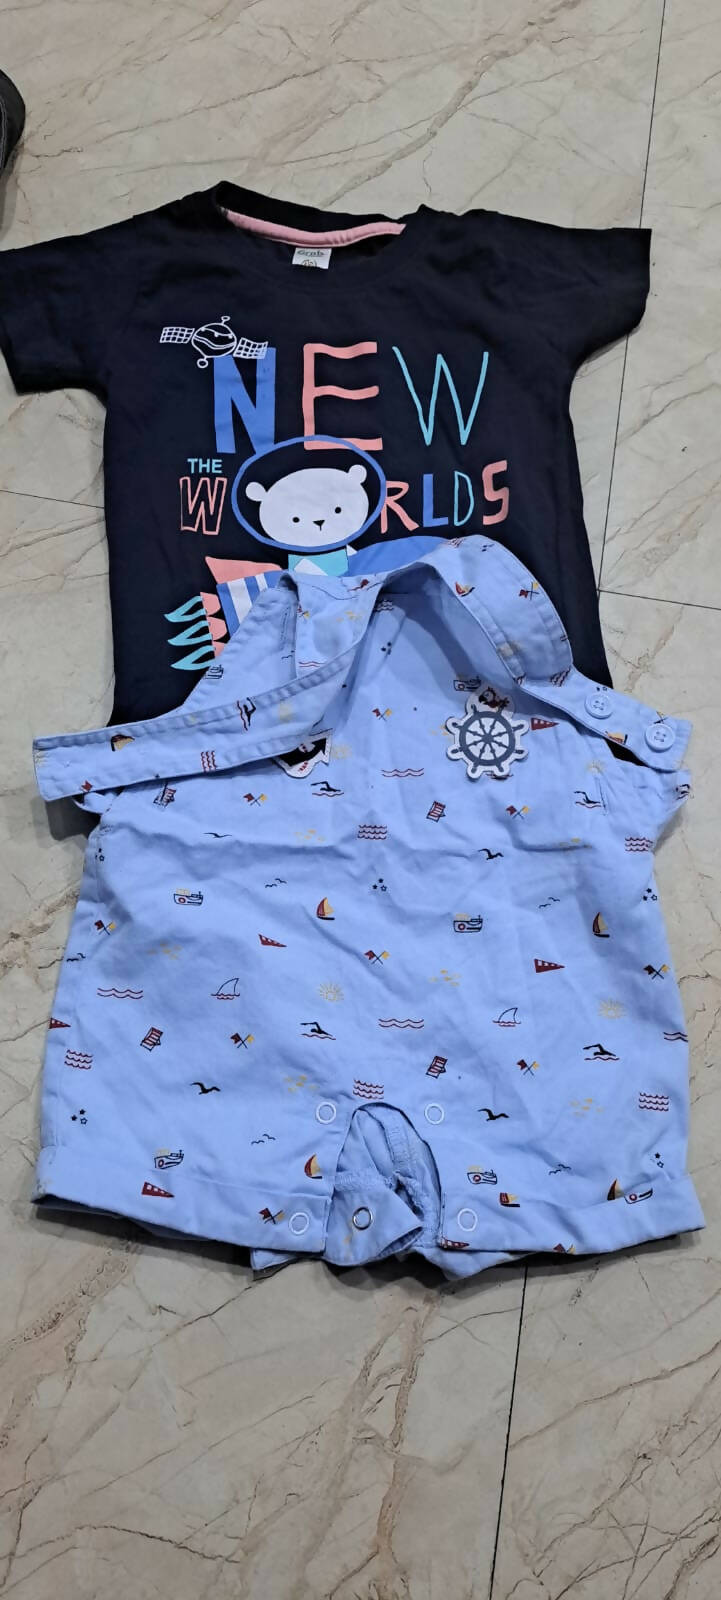 Clothes for Boy - Combo Of 5 (Hardly used)